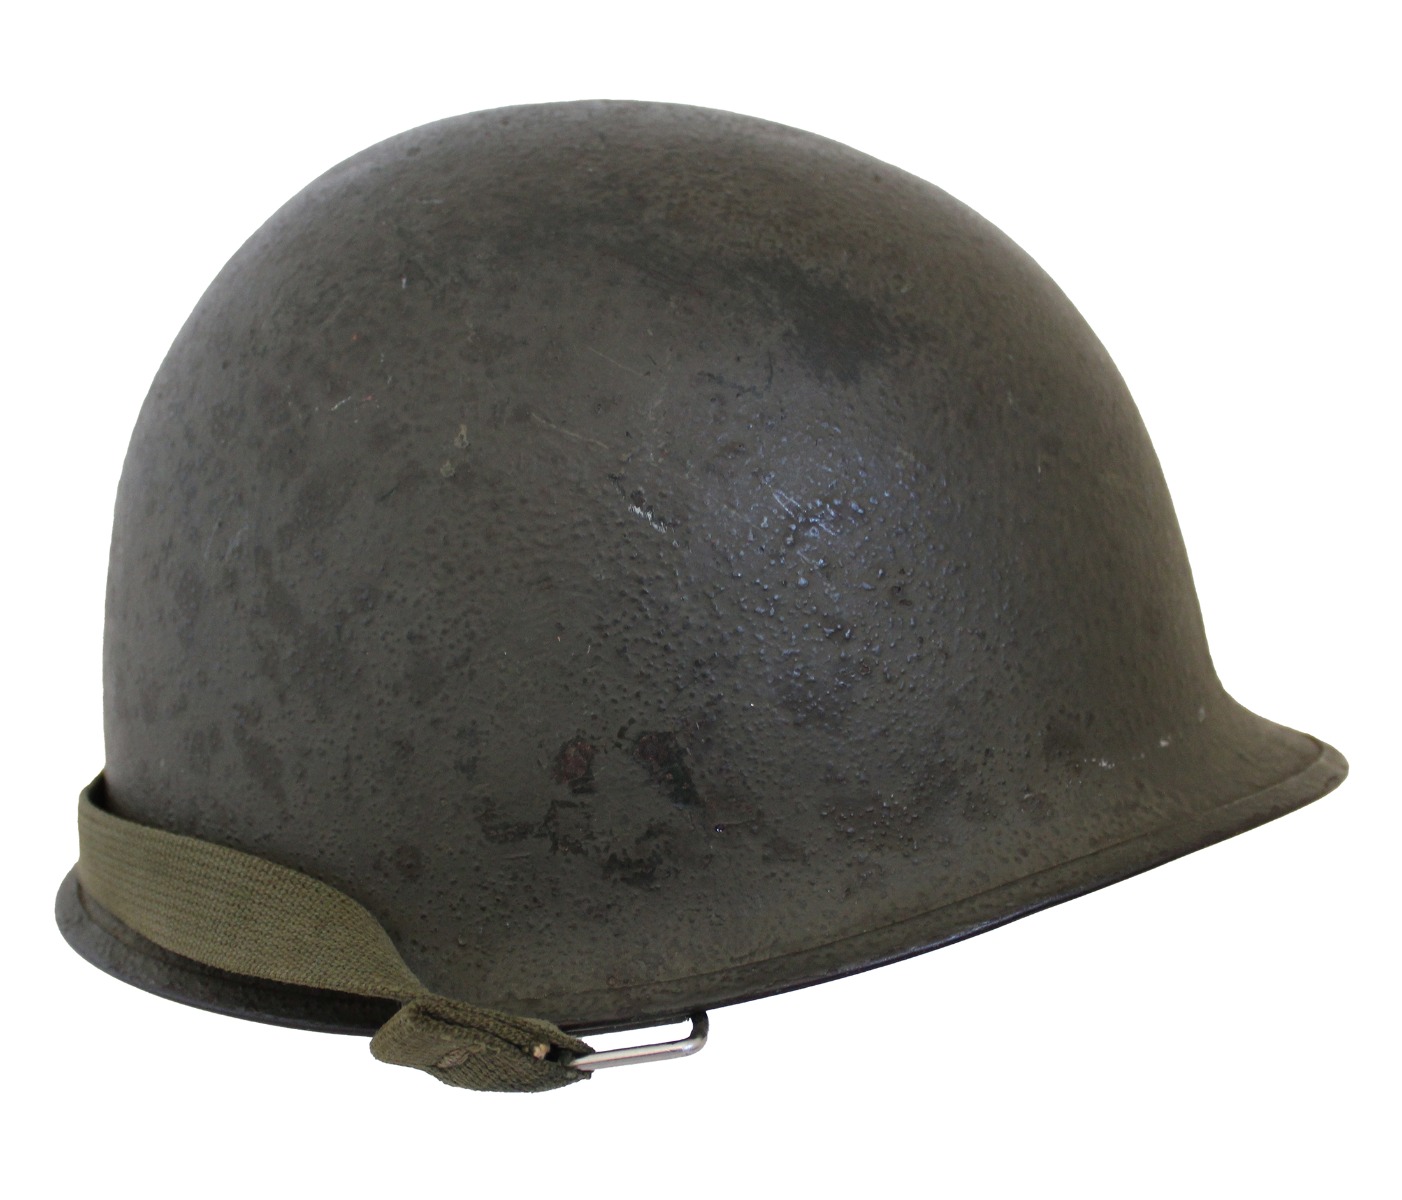 US WW2 M1 1943 STEEL HELMET WITH LINER AND CHIN STRAP